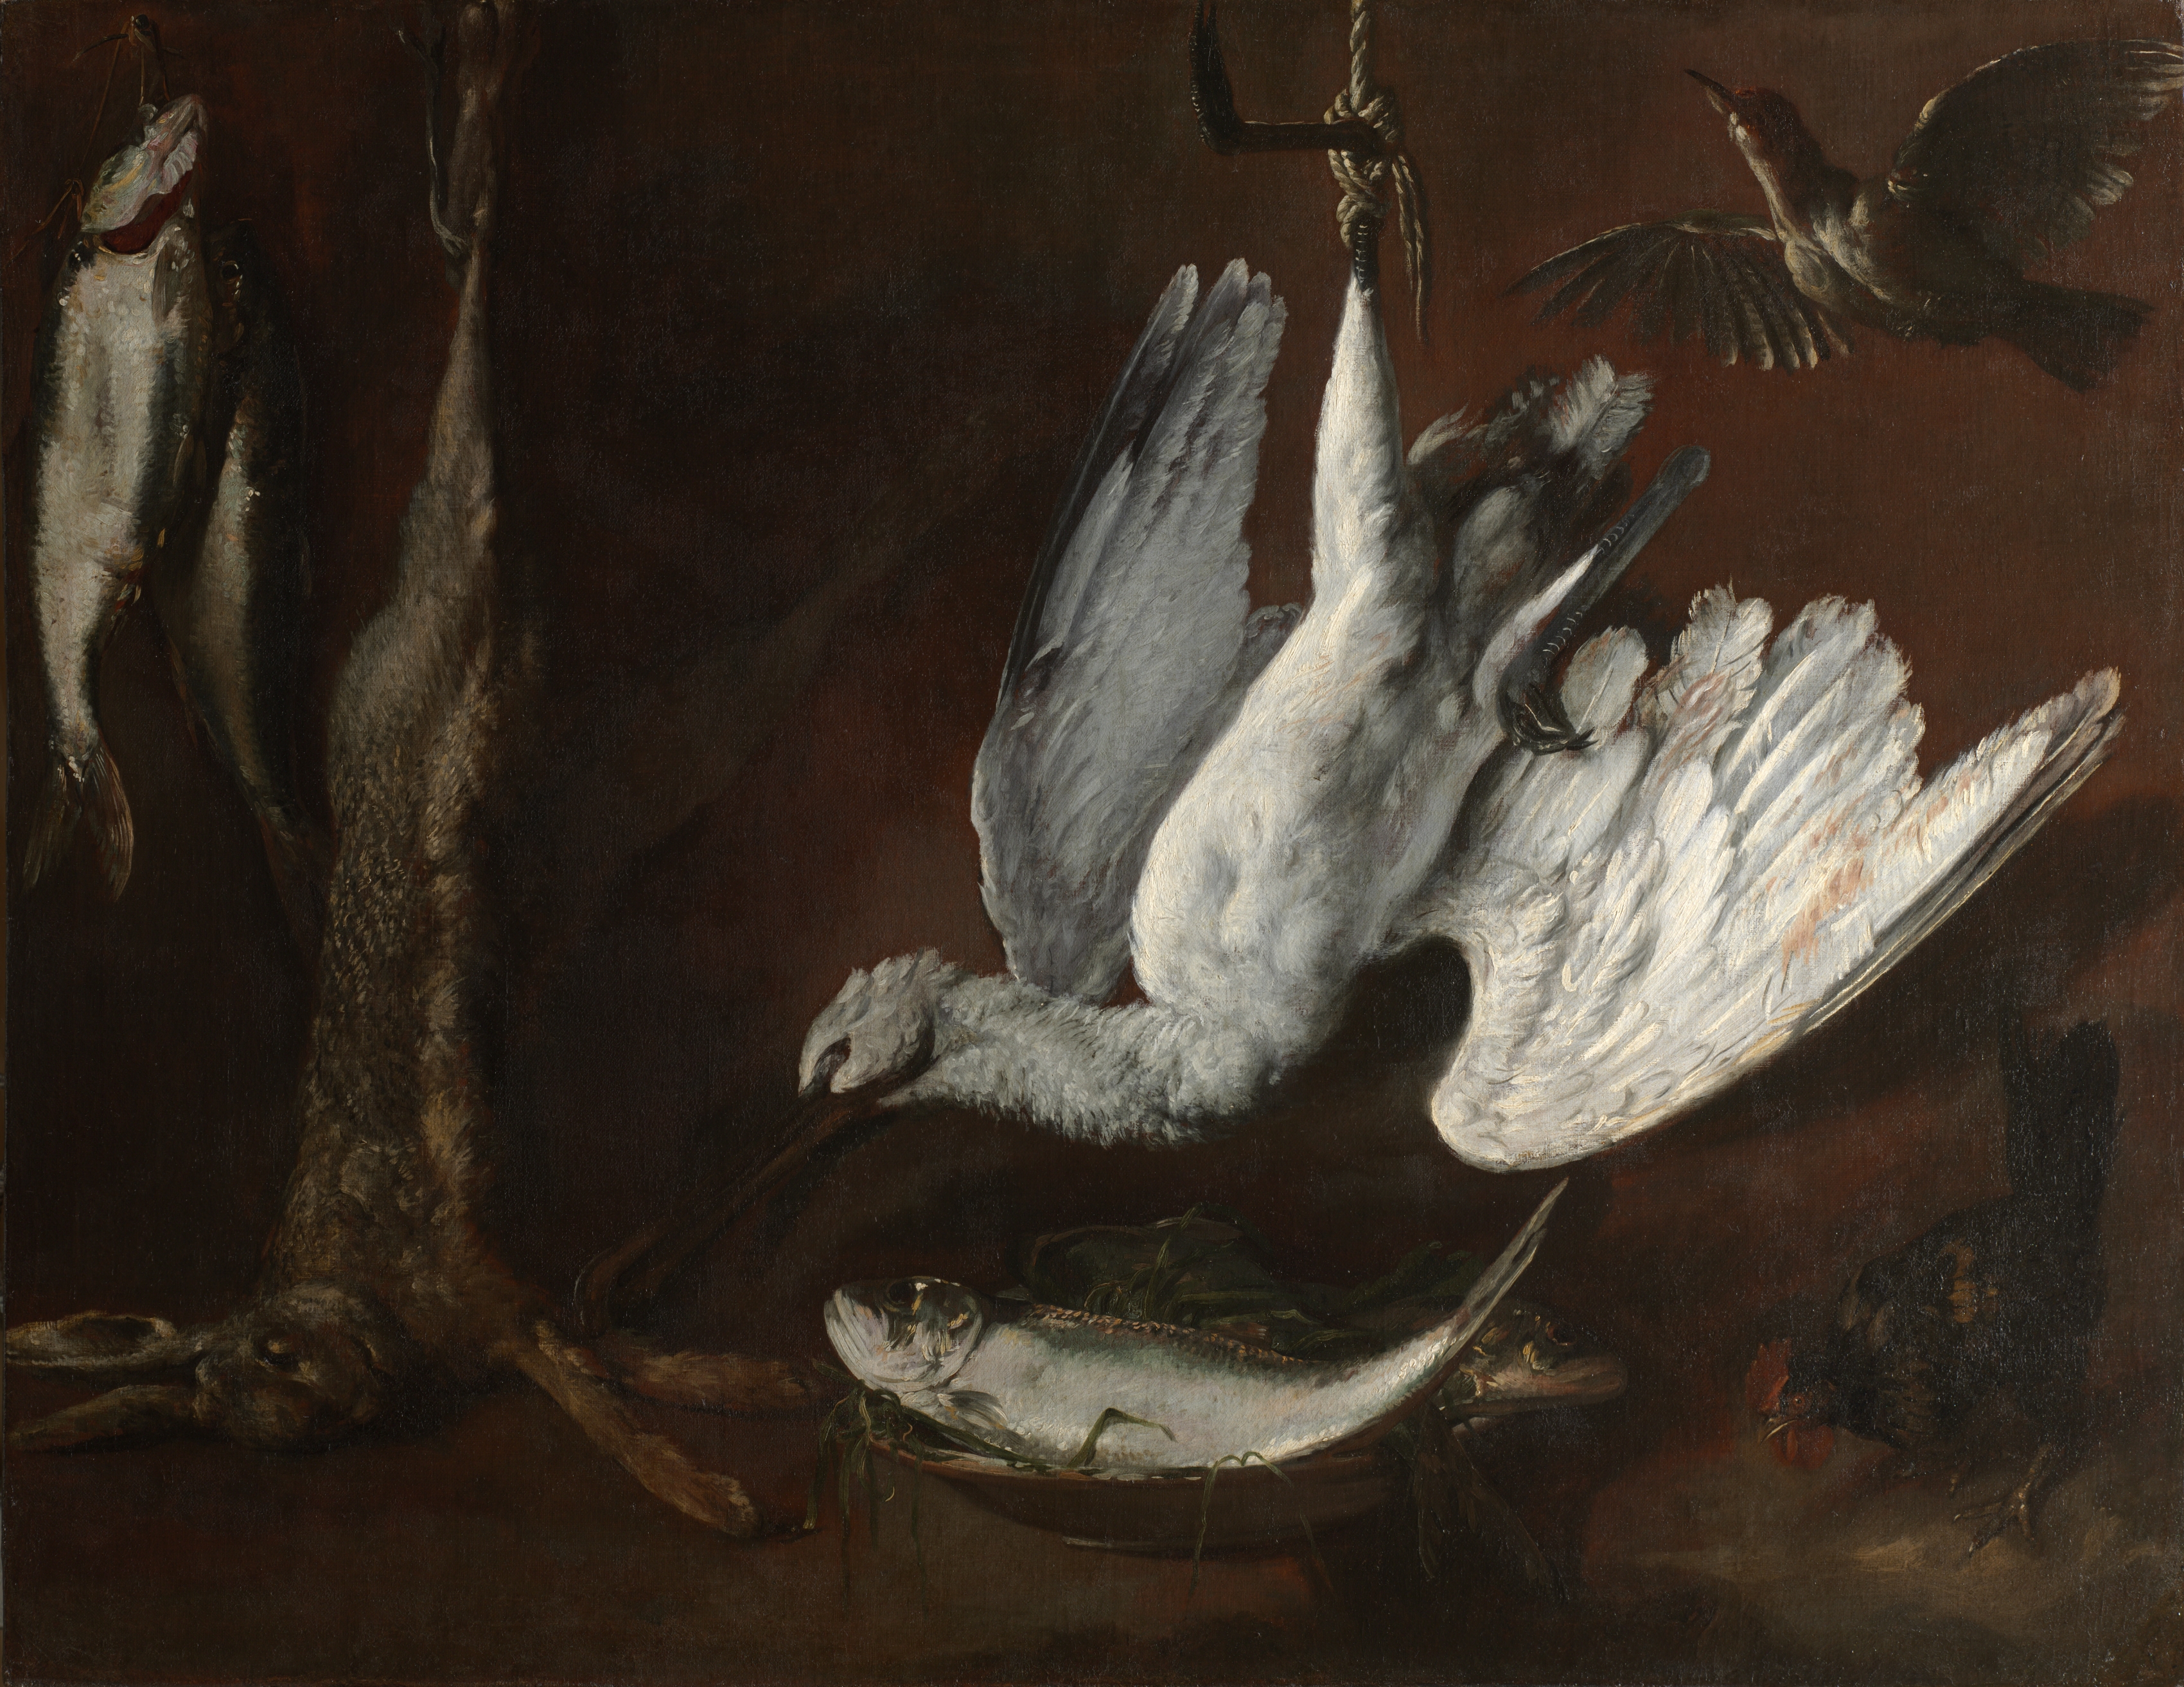 Hare, Spoonbill, and Fish